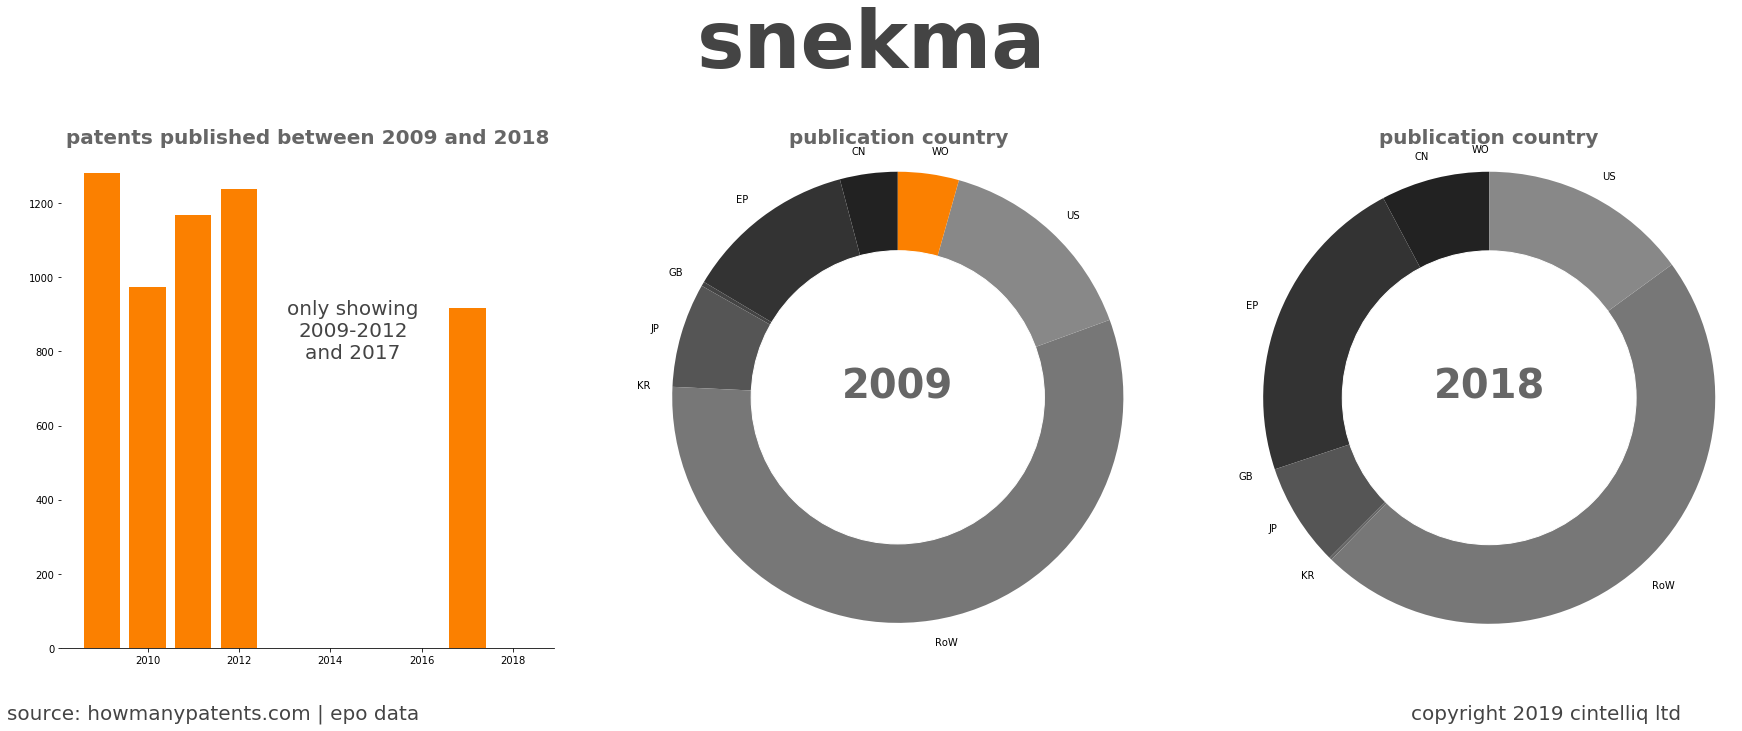 summary of patents for Snekma